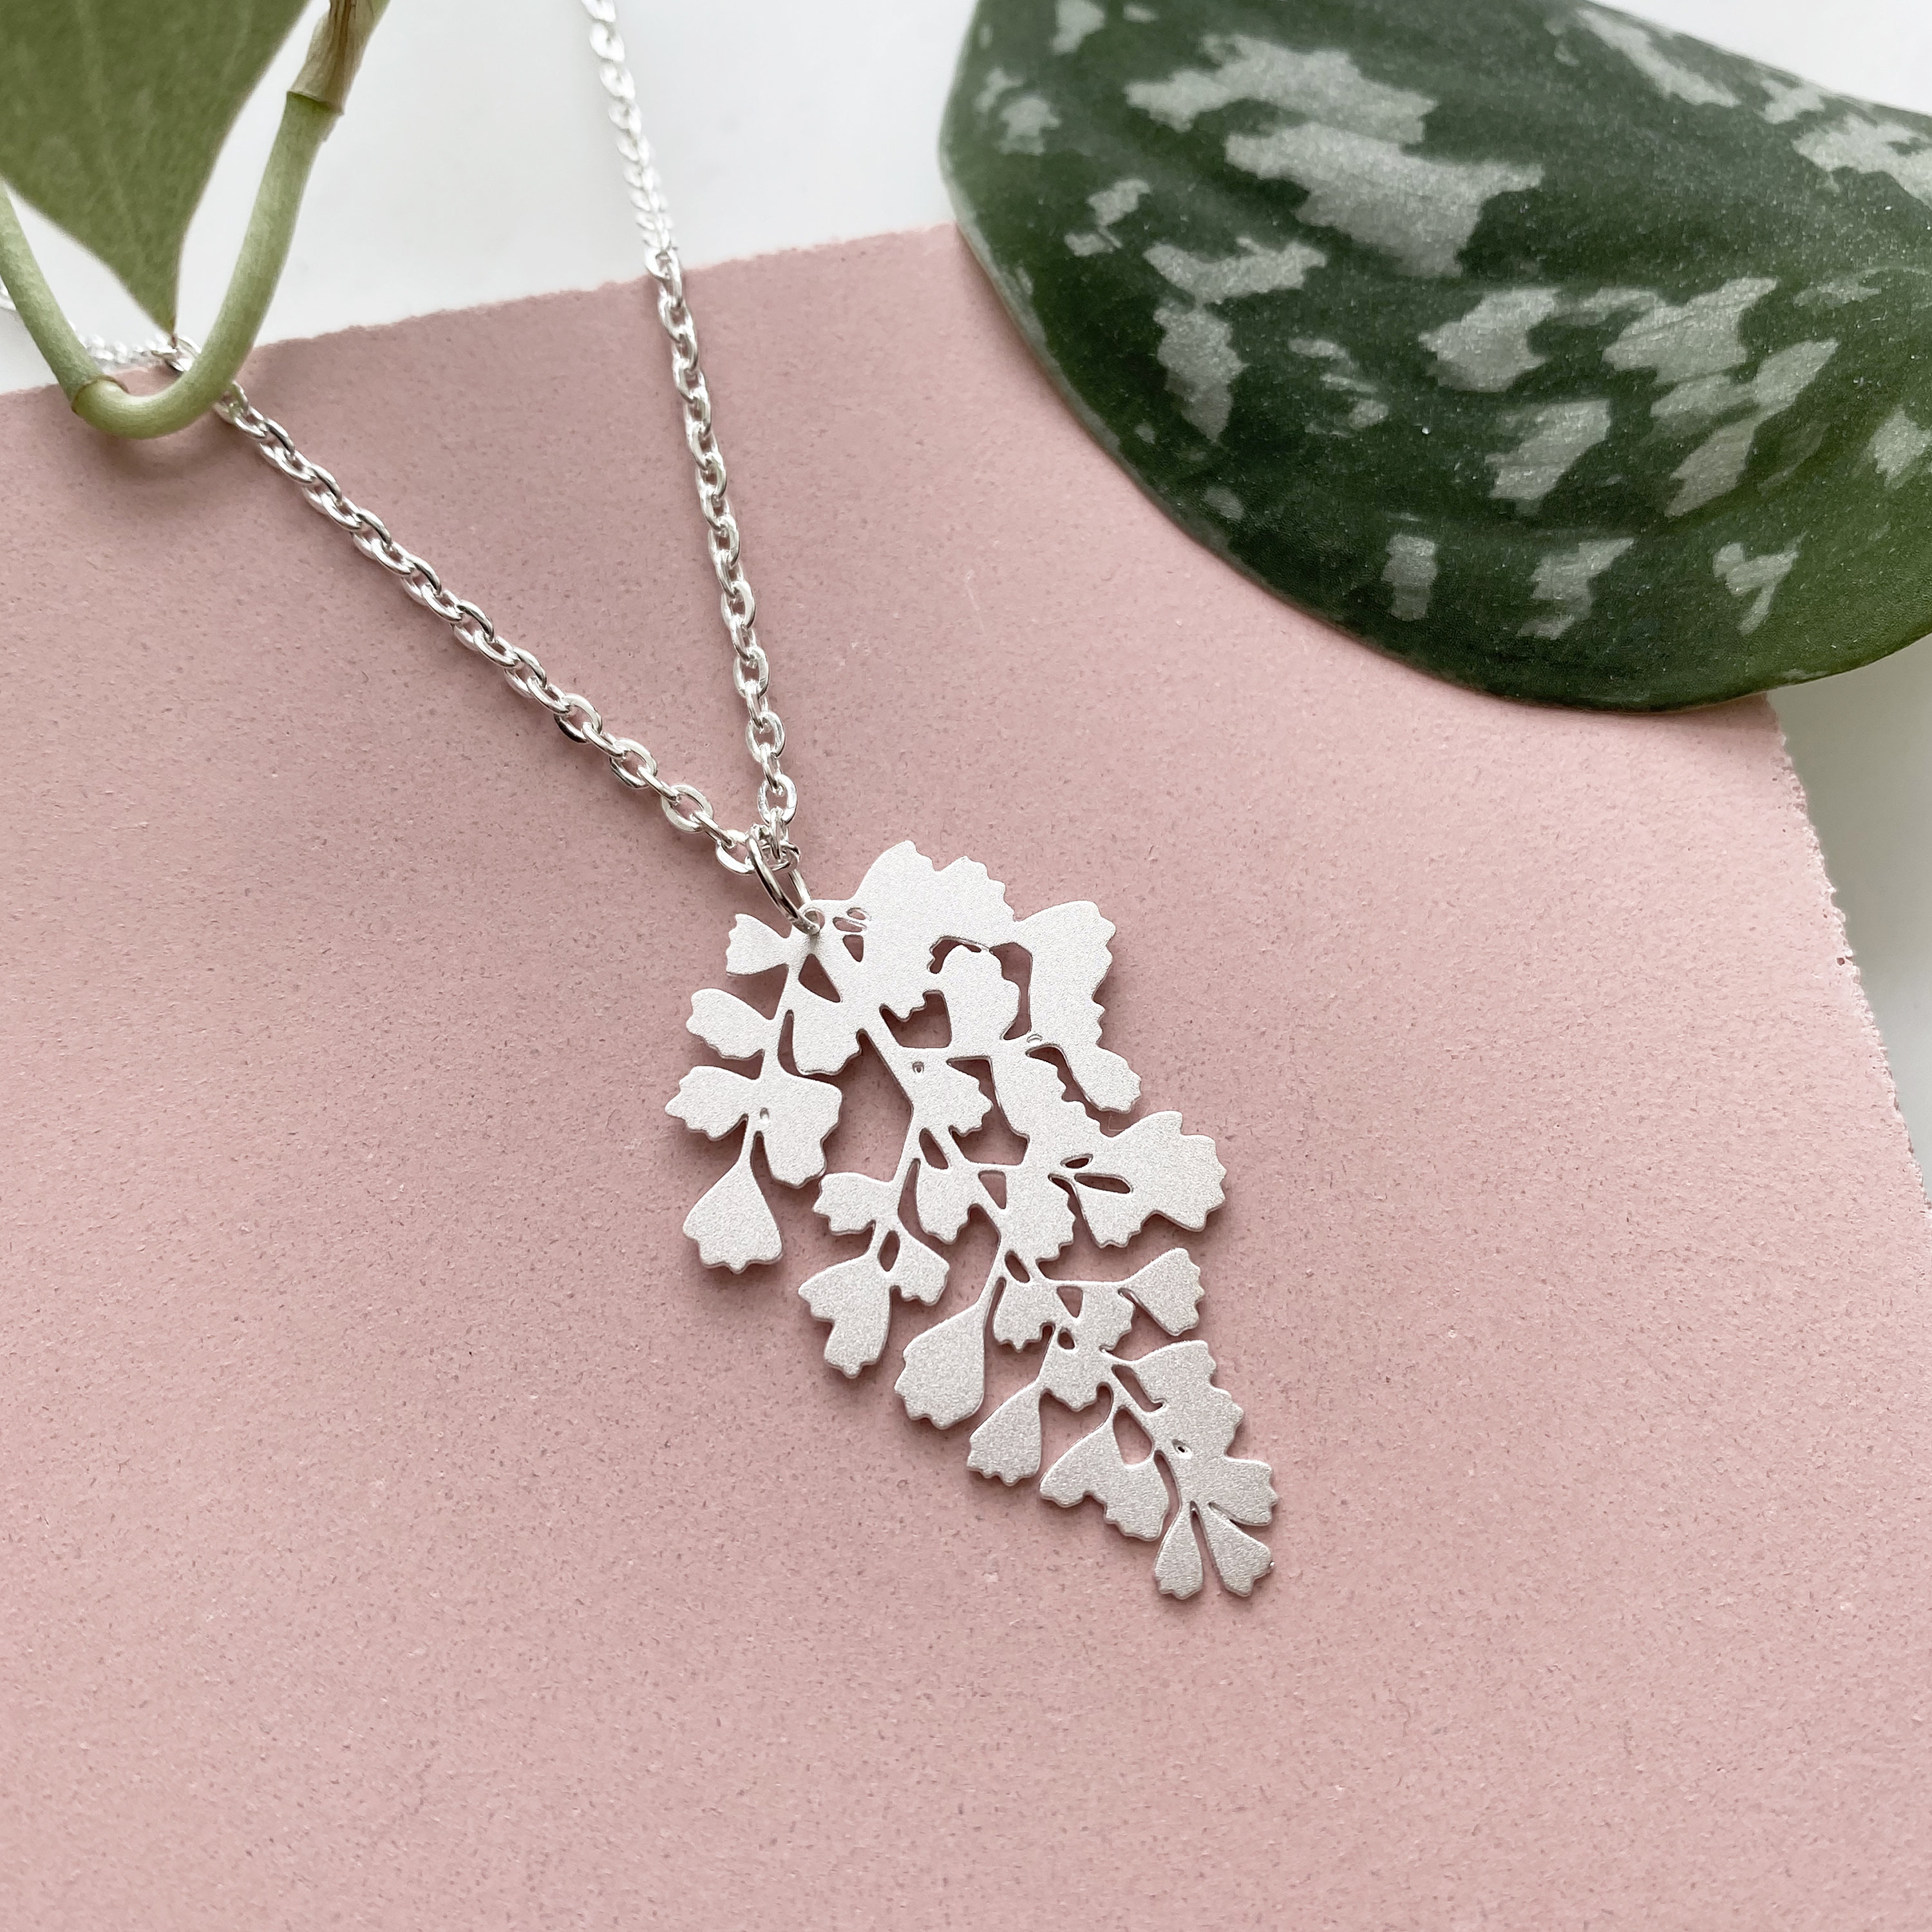 Silver Maidenhair Fern Necklace - Leaf Pendant Jewellery Plant Gift For Her